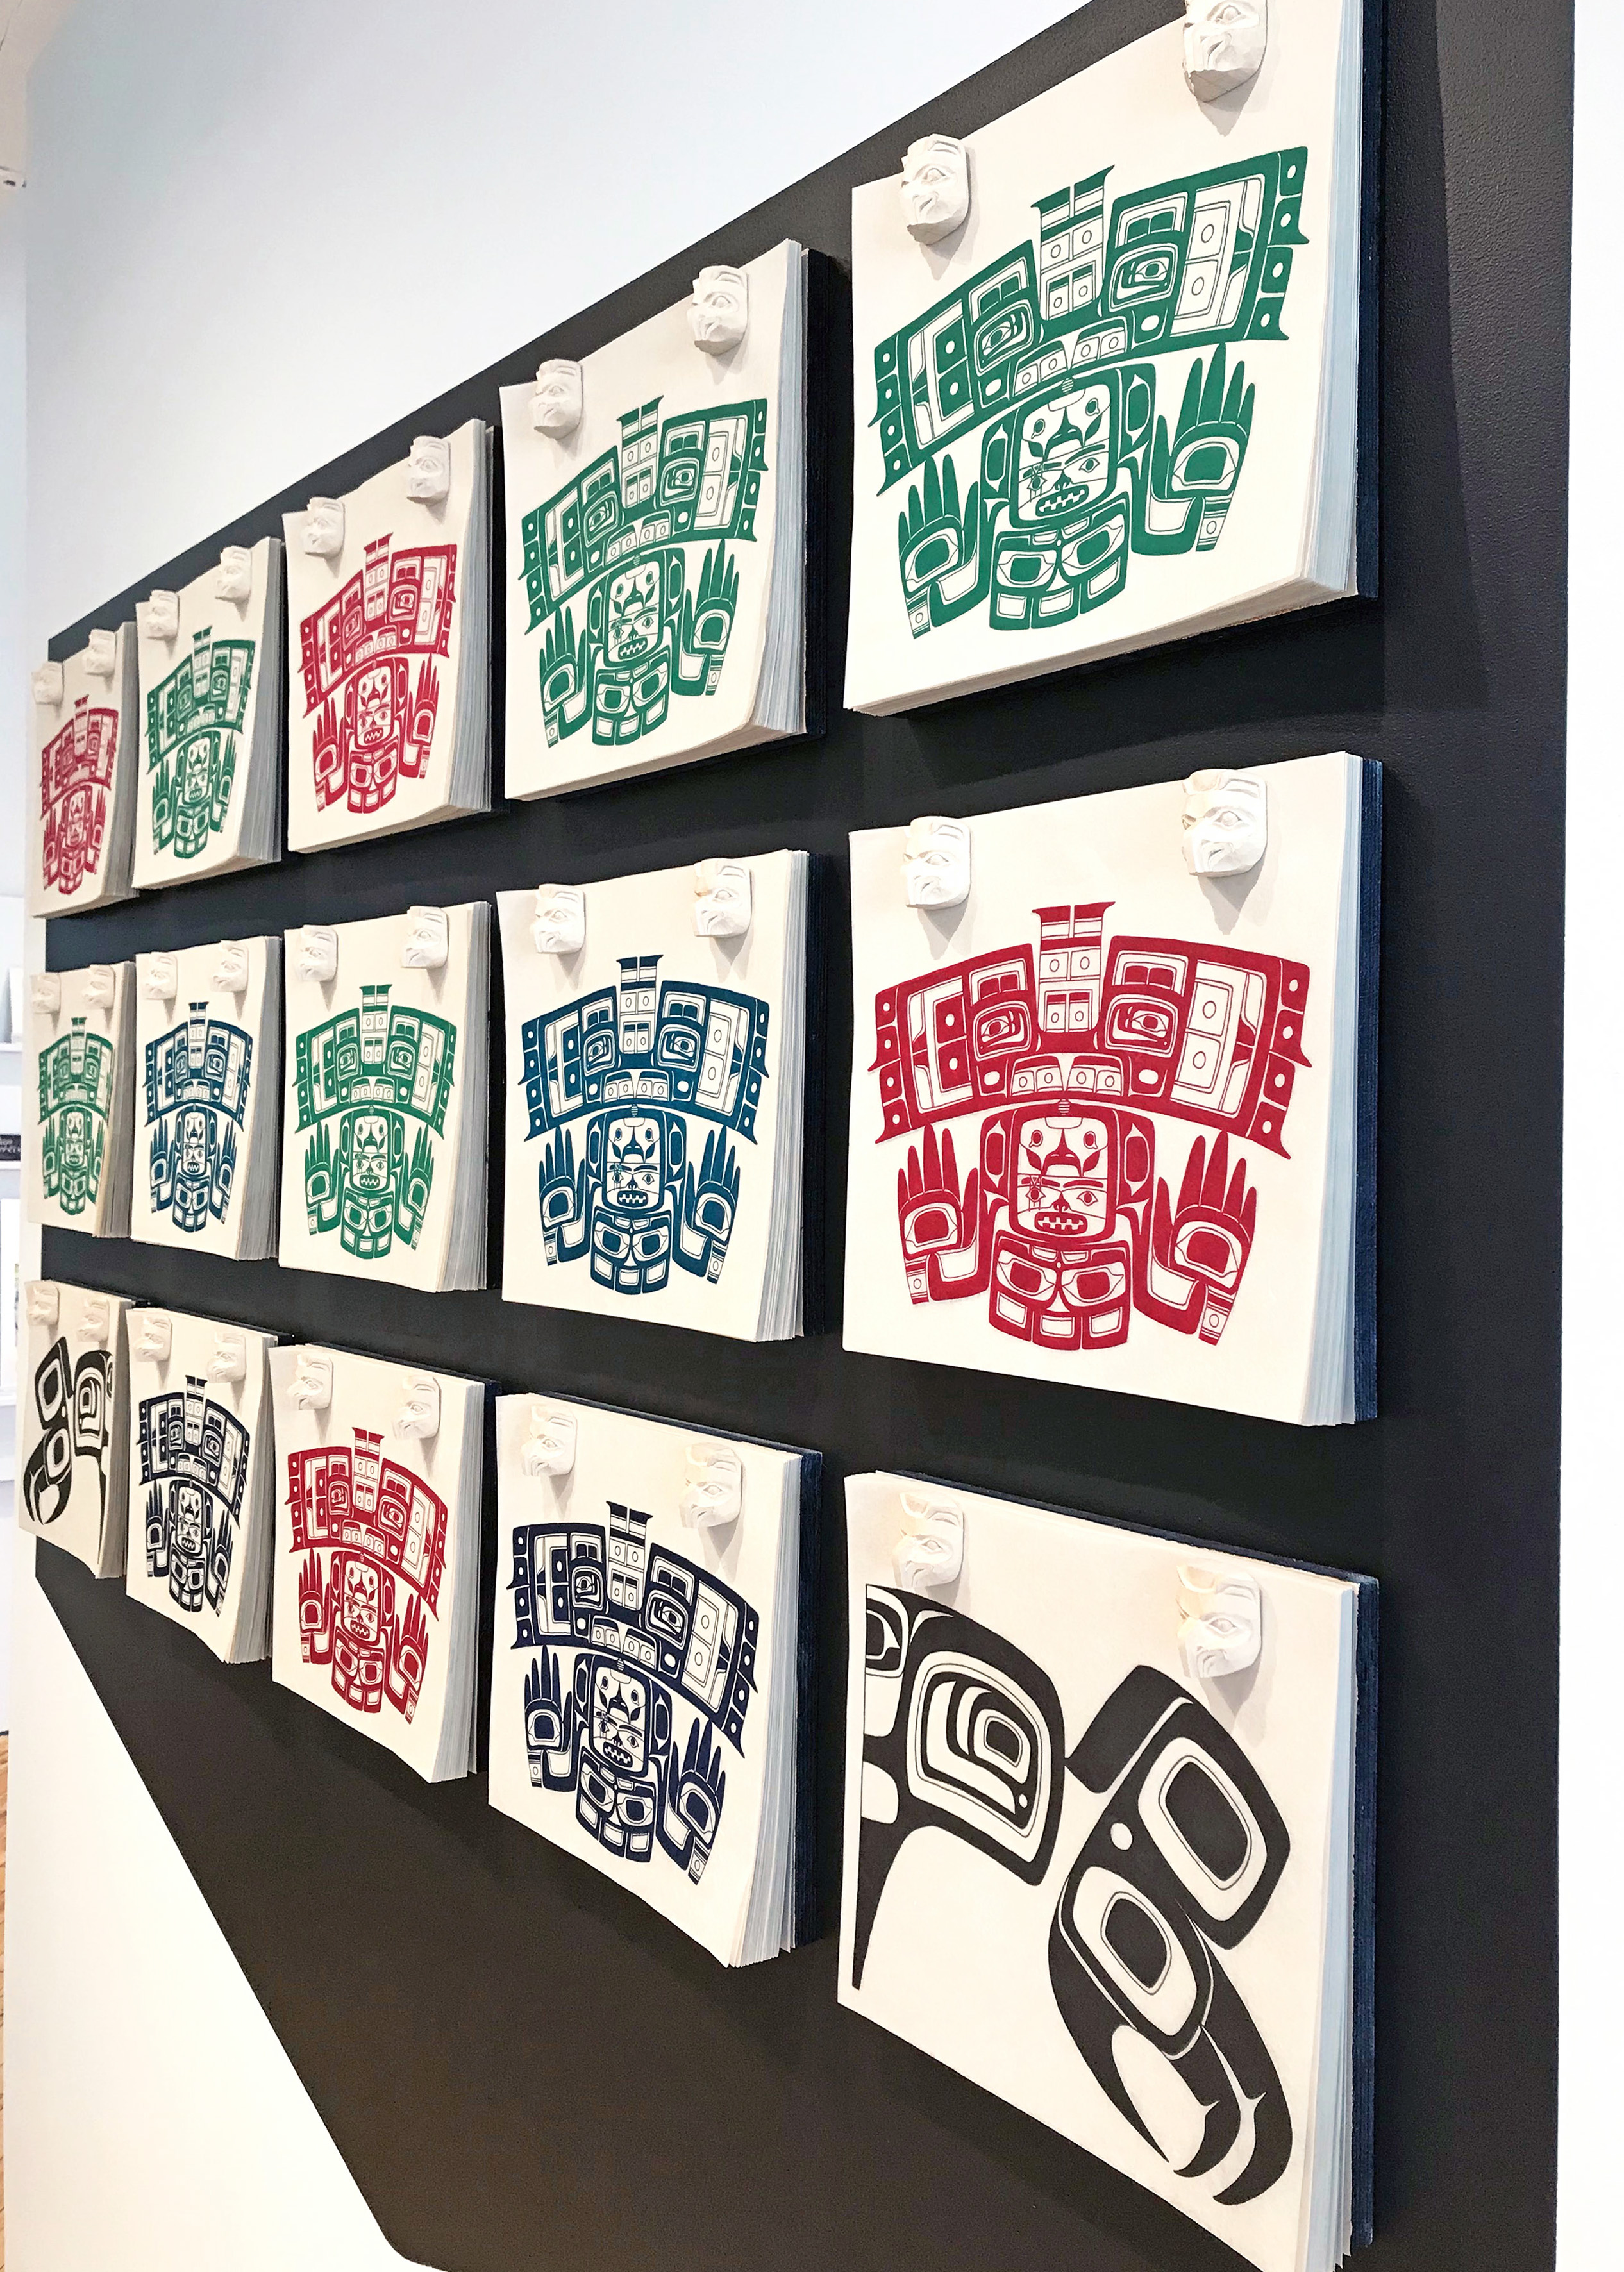 A sidelong view of Luke Parnell's installation of lithograph prints based on Northwest coast Indigenous Chilkat blankets stacked in hanging grids against a black background